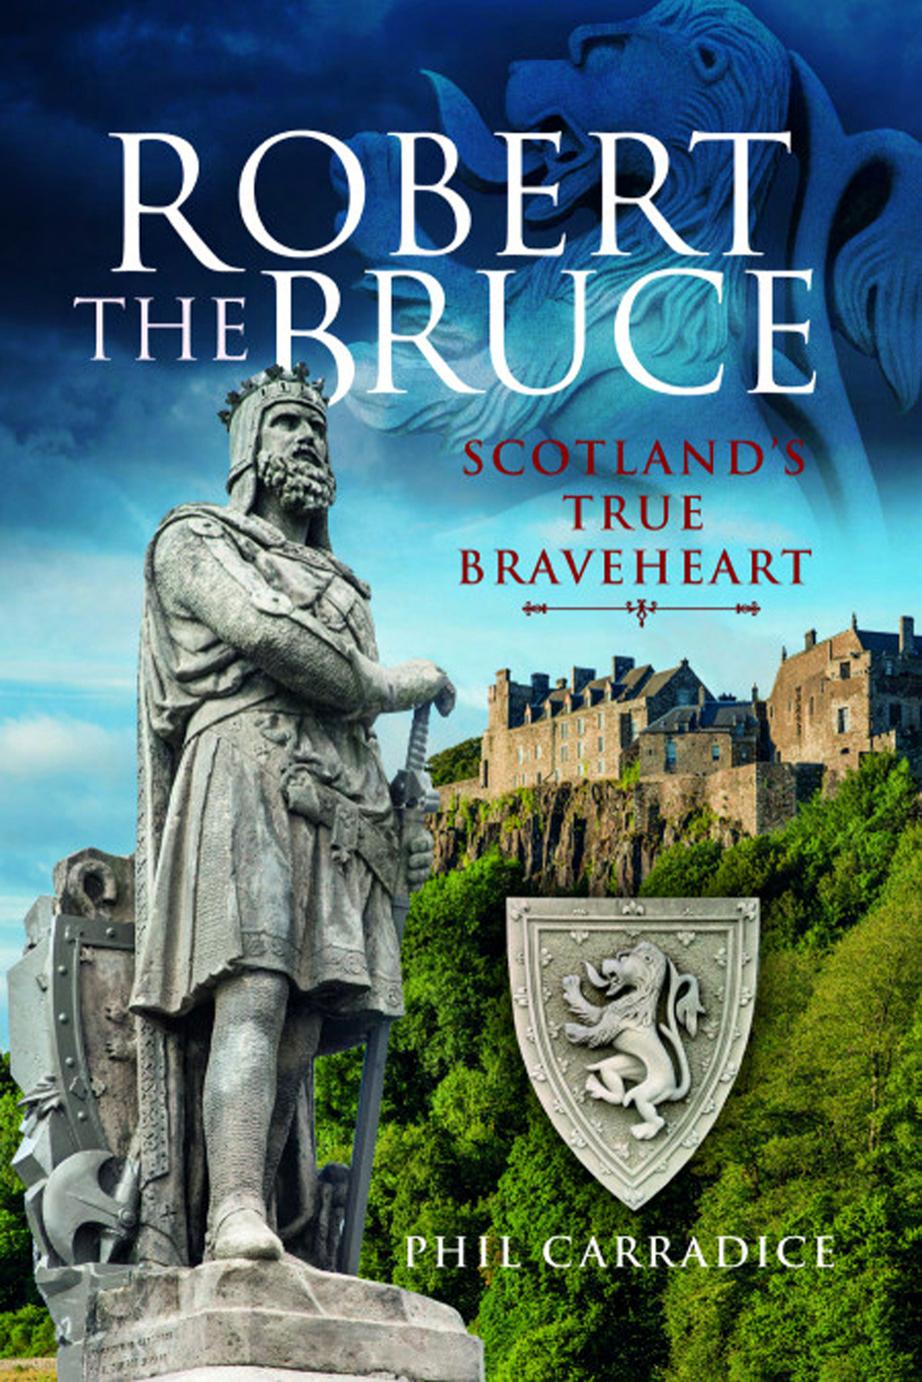 Robert the Bruce by Phil Carradice